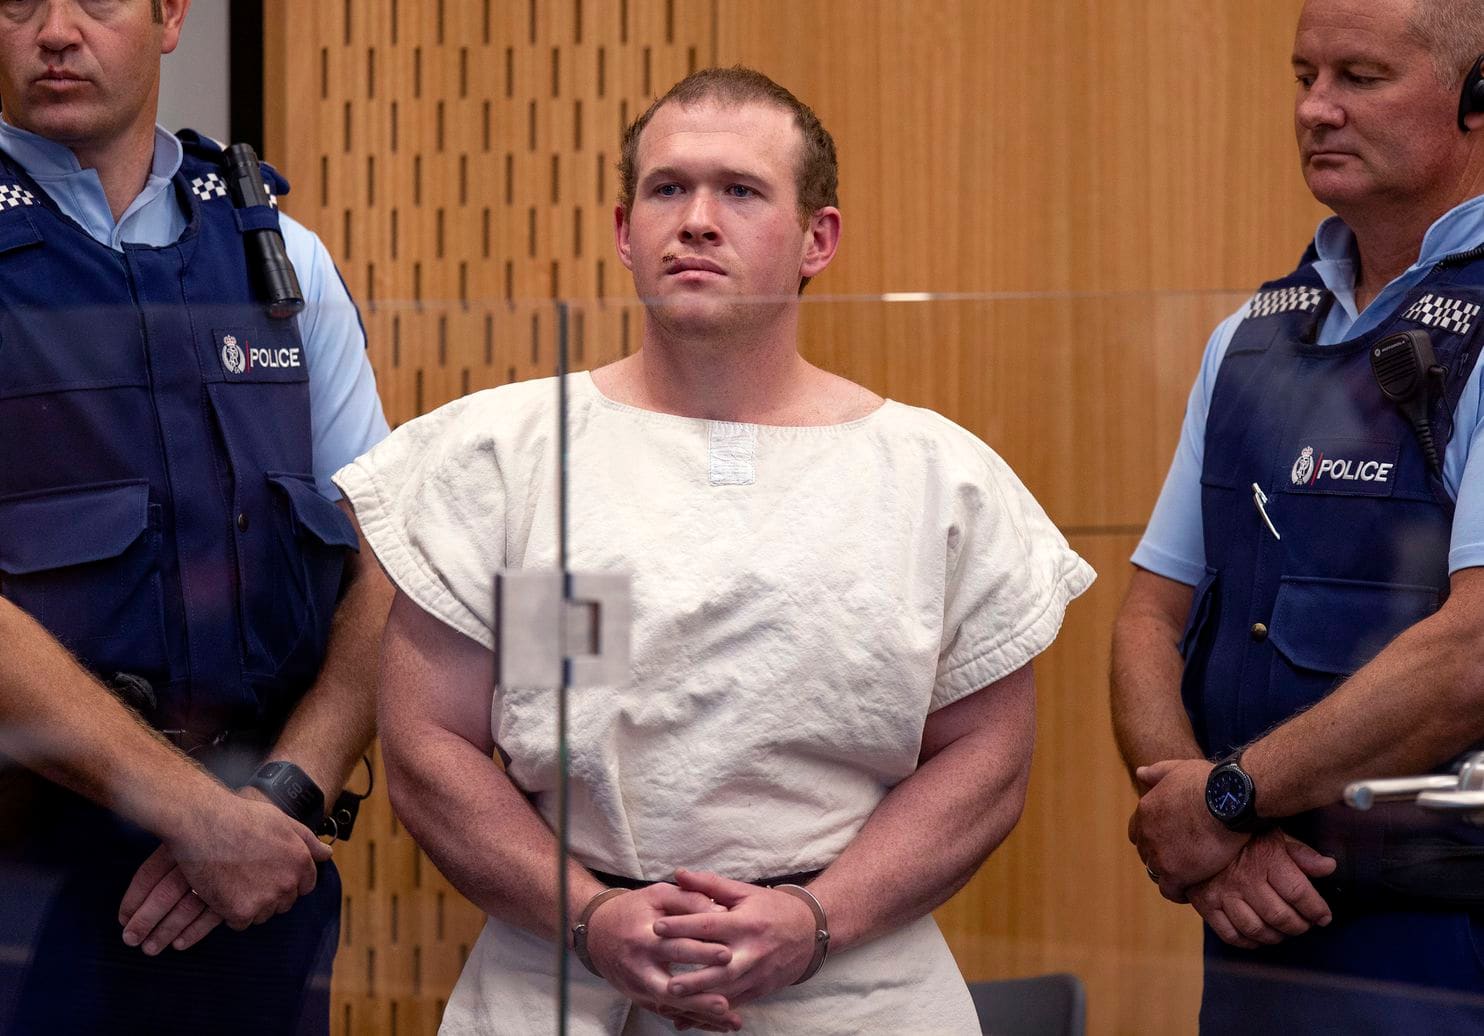 Accused Christchurch gunman pleads not guilty in New Zealand court